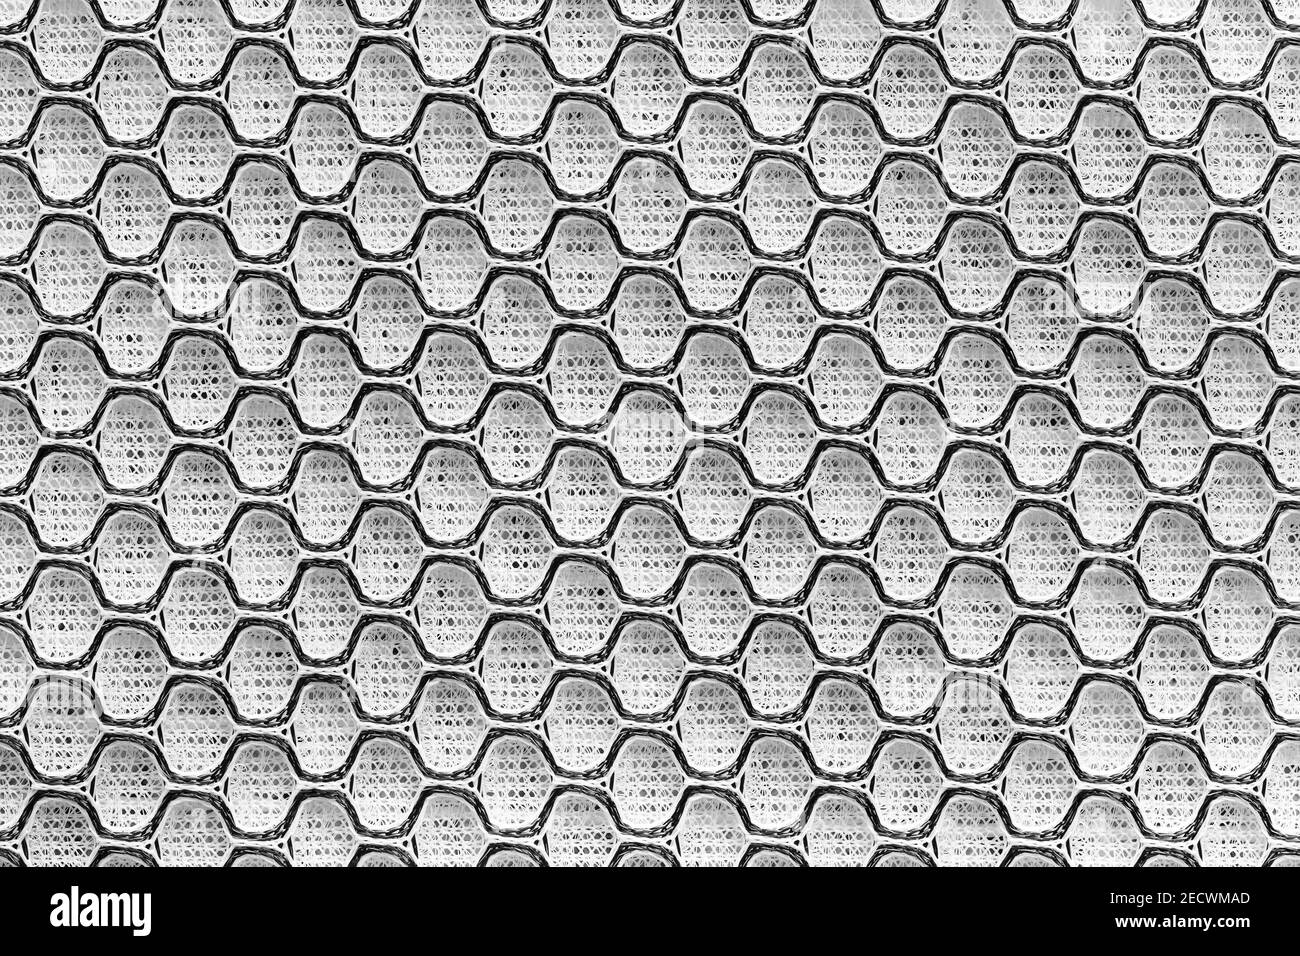 407,514 Mesh Fabric Images, Stock Photos, 3D objects, & Vectors